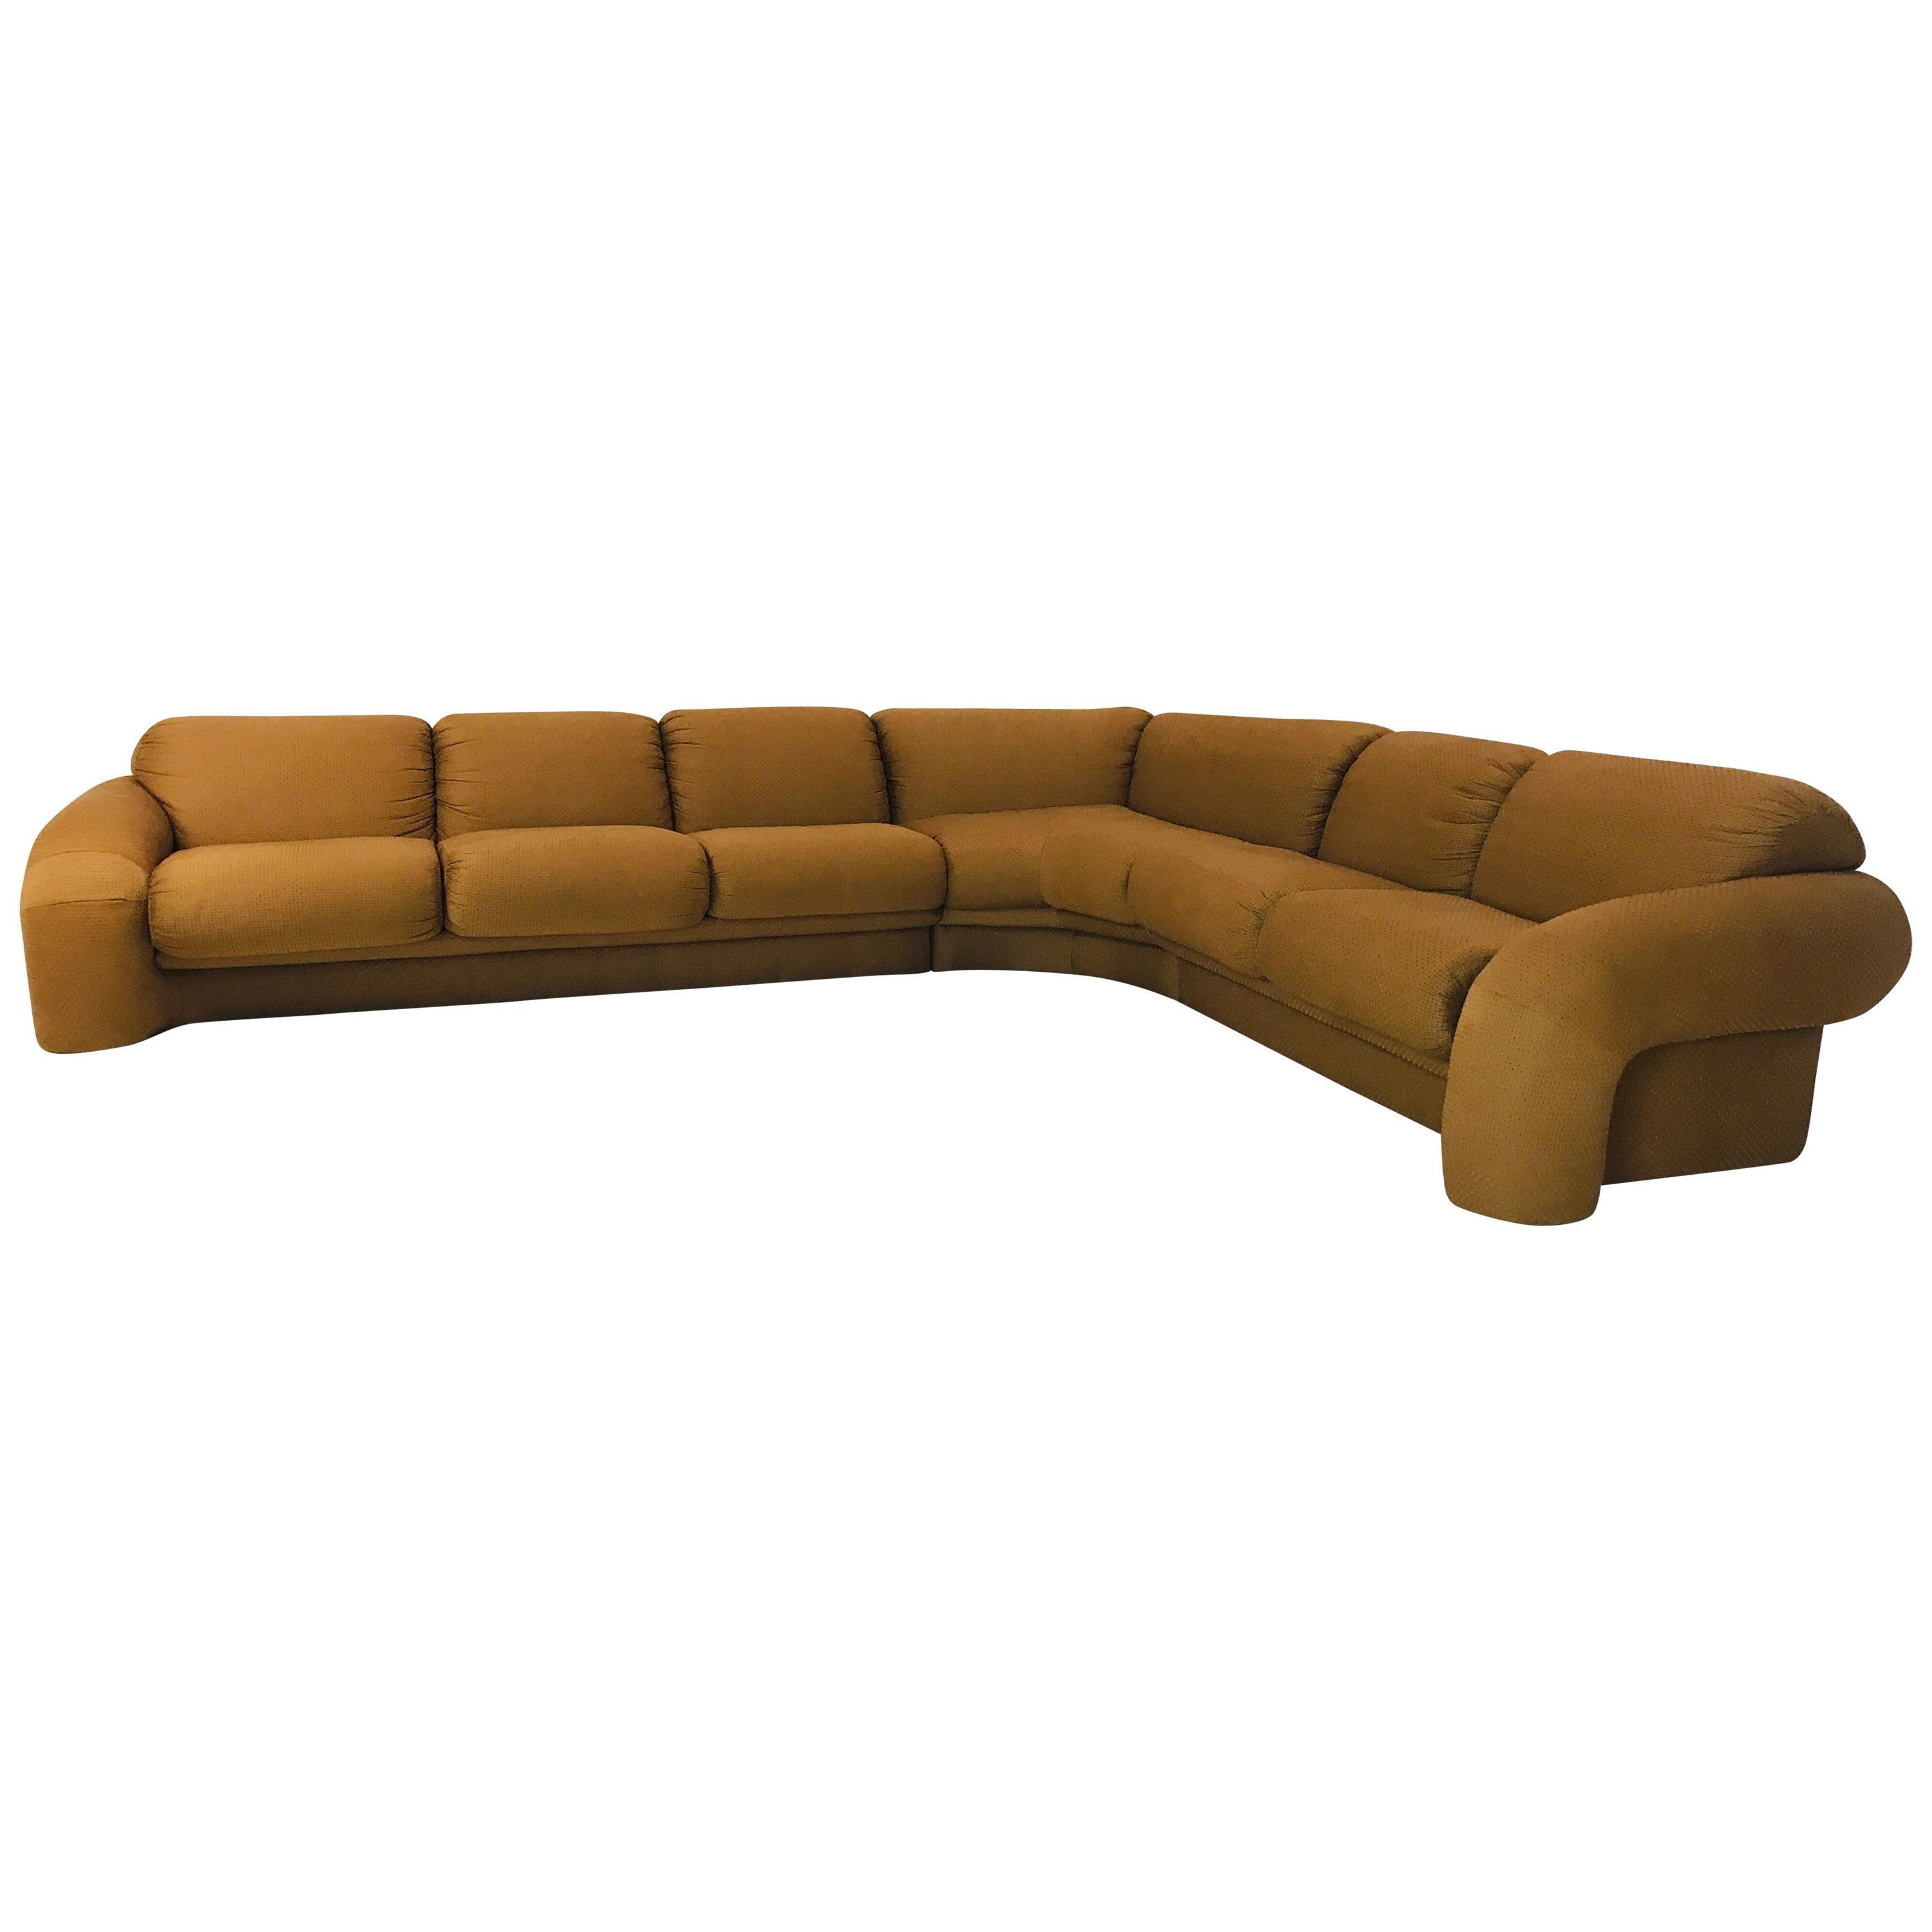 Preview 3 Piece Sectional Sofa